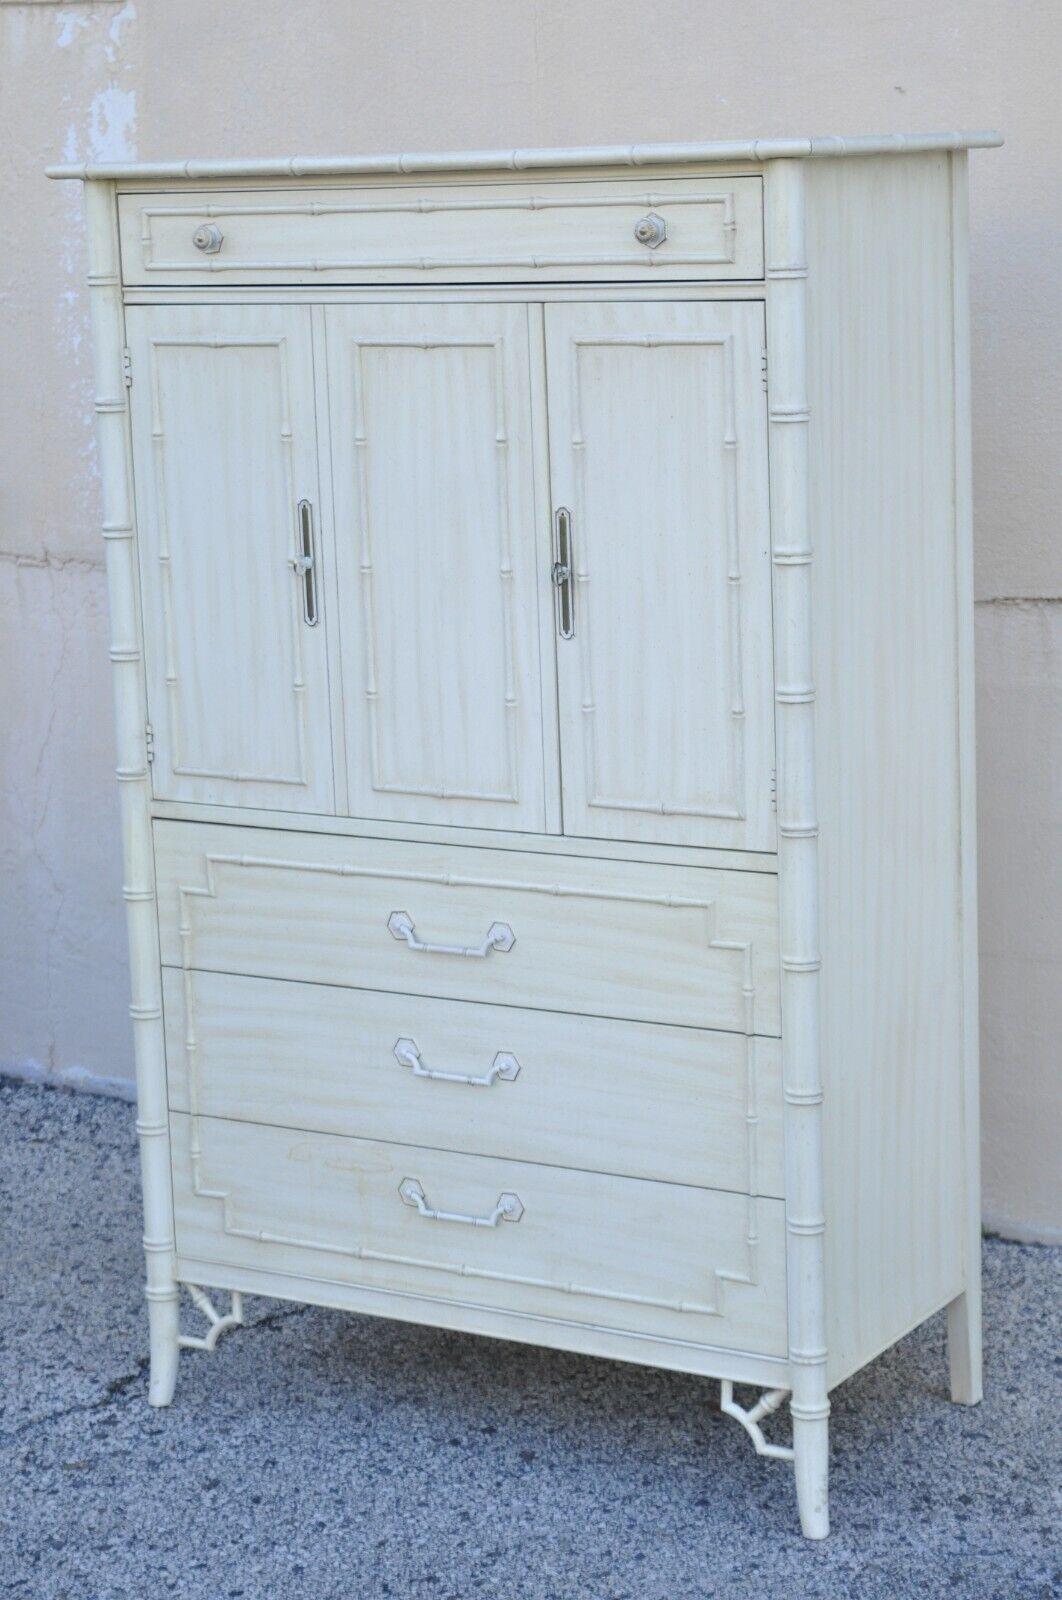 Thomasville Allegro Faux Bamboo Fretwork Highboy Tall Chest Dresser Cabinet. Item features a white laminate top, faux bamboo fretwork frame, distressed off white/beige finish, 2 swing doors, 4 drawers. Circa 1972. Measurements: 61